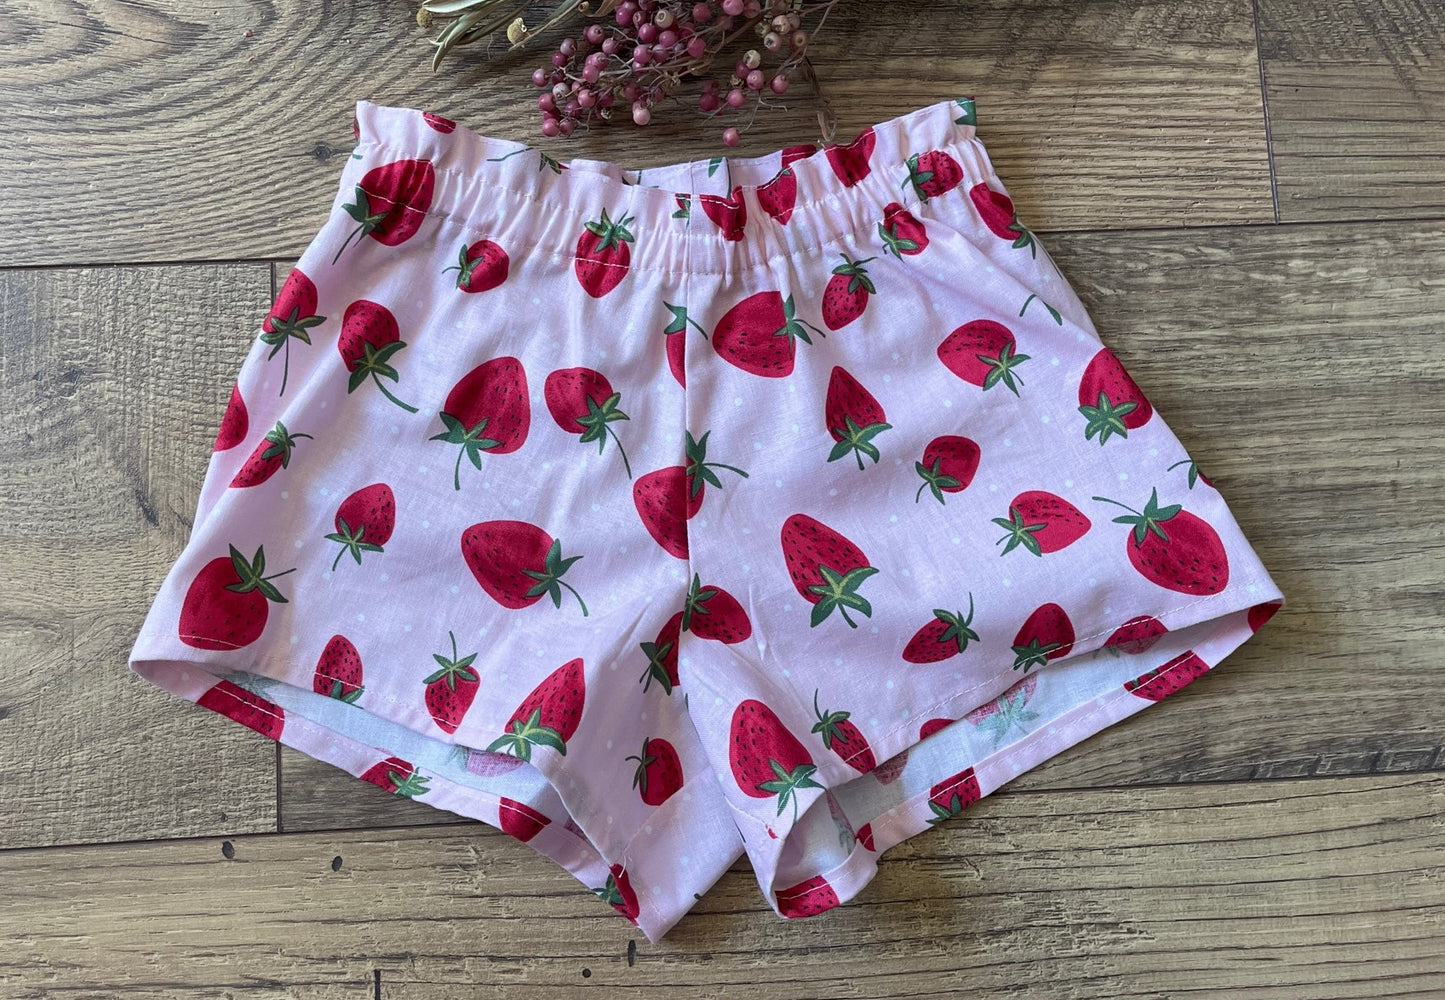 Girls Infant Toddler STRAWBERRIES Boho Clothing 2 piece outfit Off the Shoulder Top with Shorts